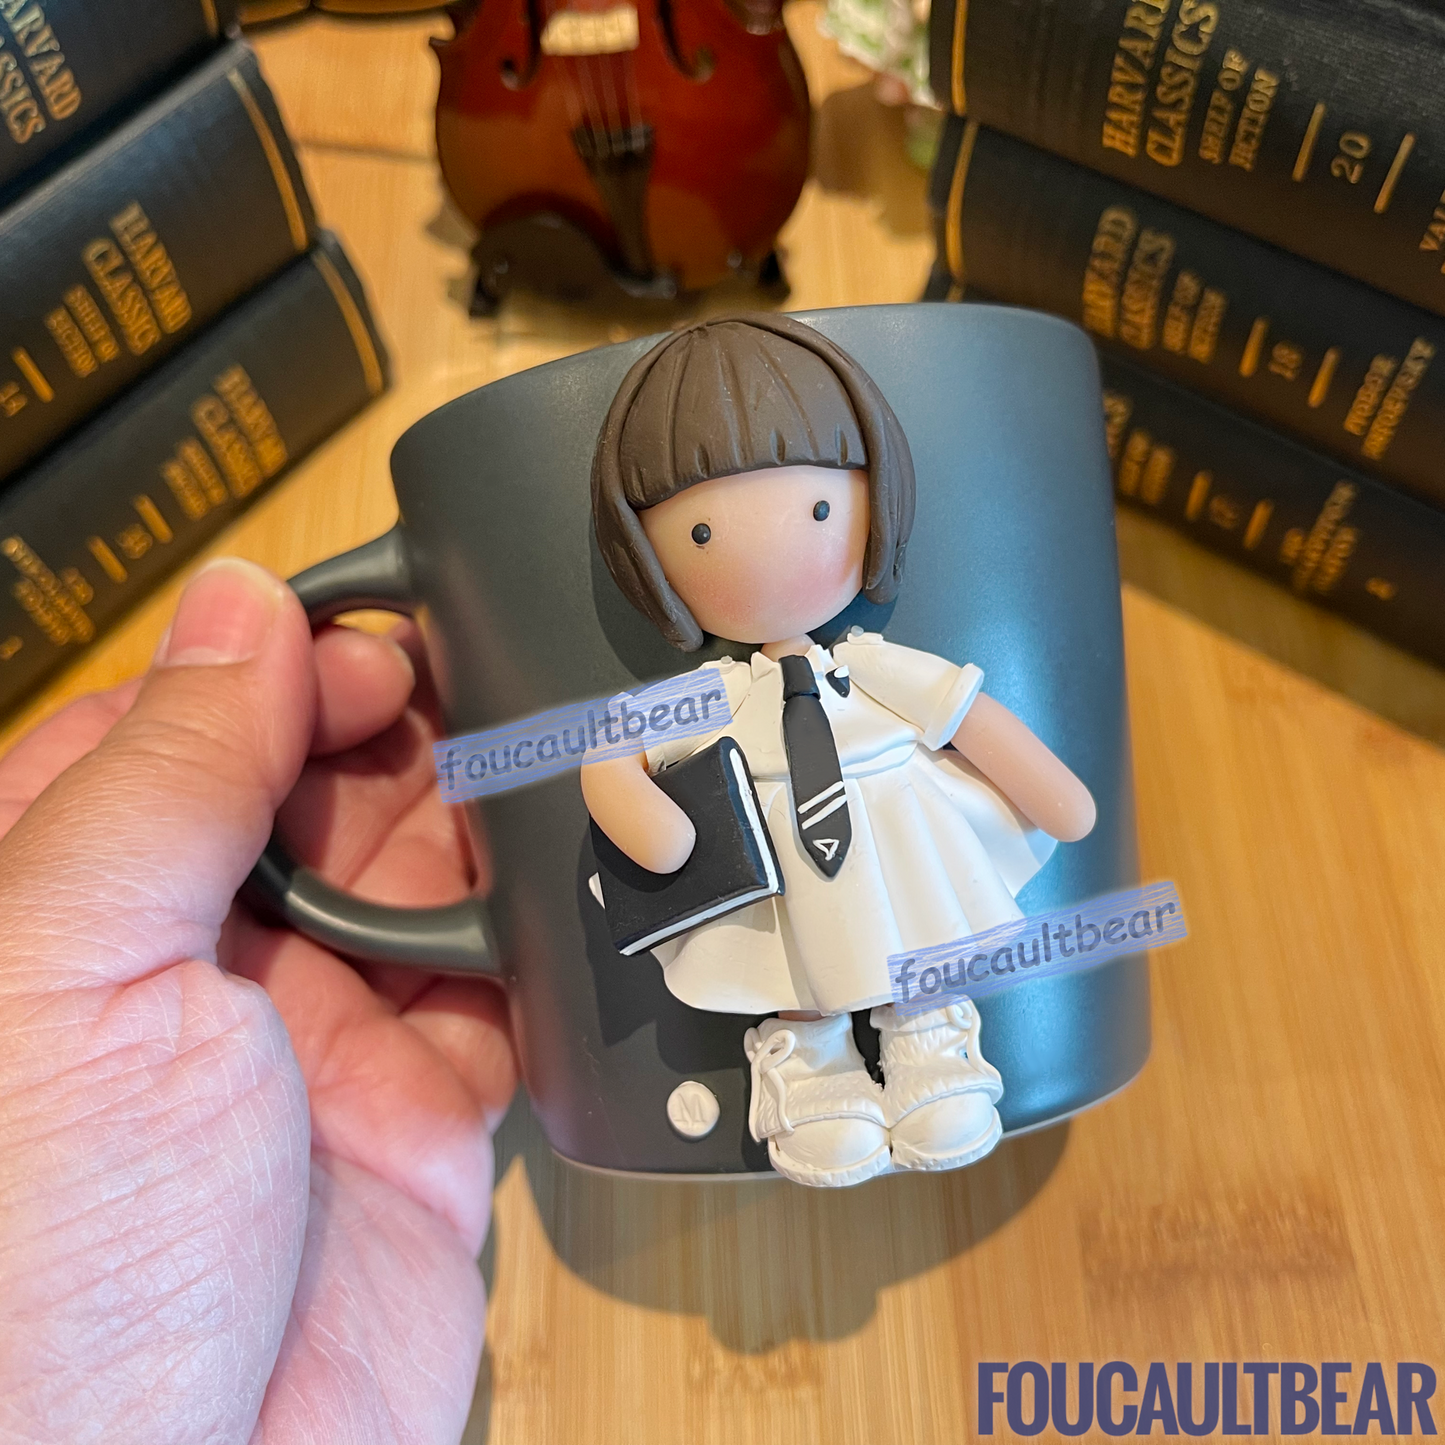 I'm very excited to debut my handcrafted "School Series" polymer clay figurine on mugs. Introducing for the first time, Chloe, of the Chloe and Caden series. Every Chloe and Caden figurine is handcrafted with lots of thought and care. They make great storage for pens, pencils, small rulers, etc....